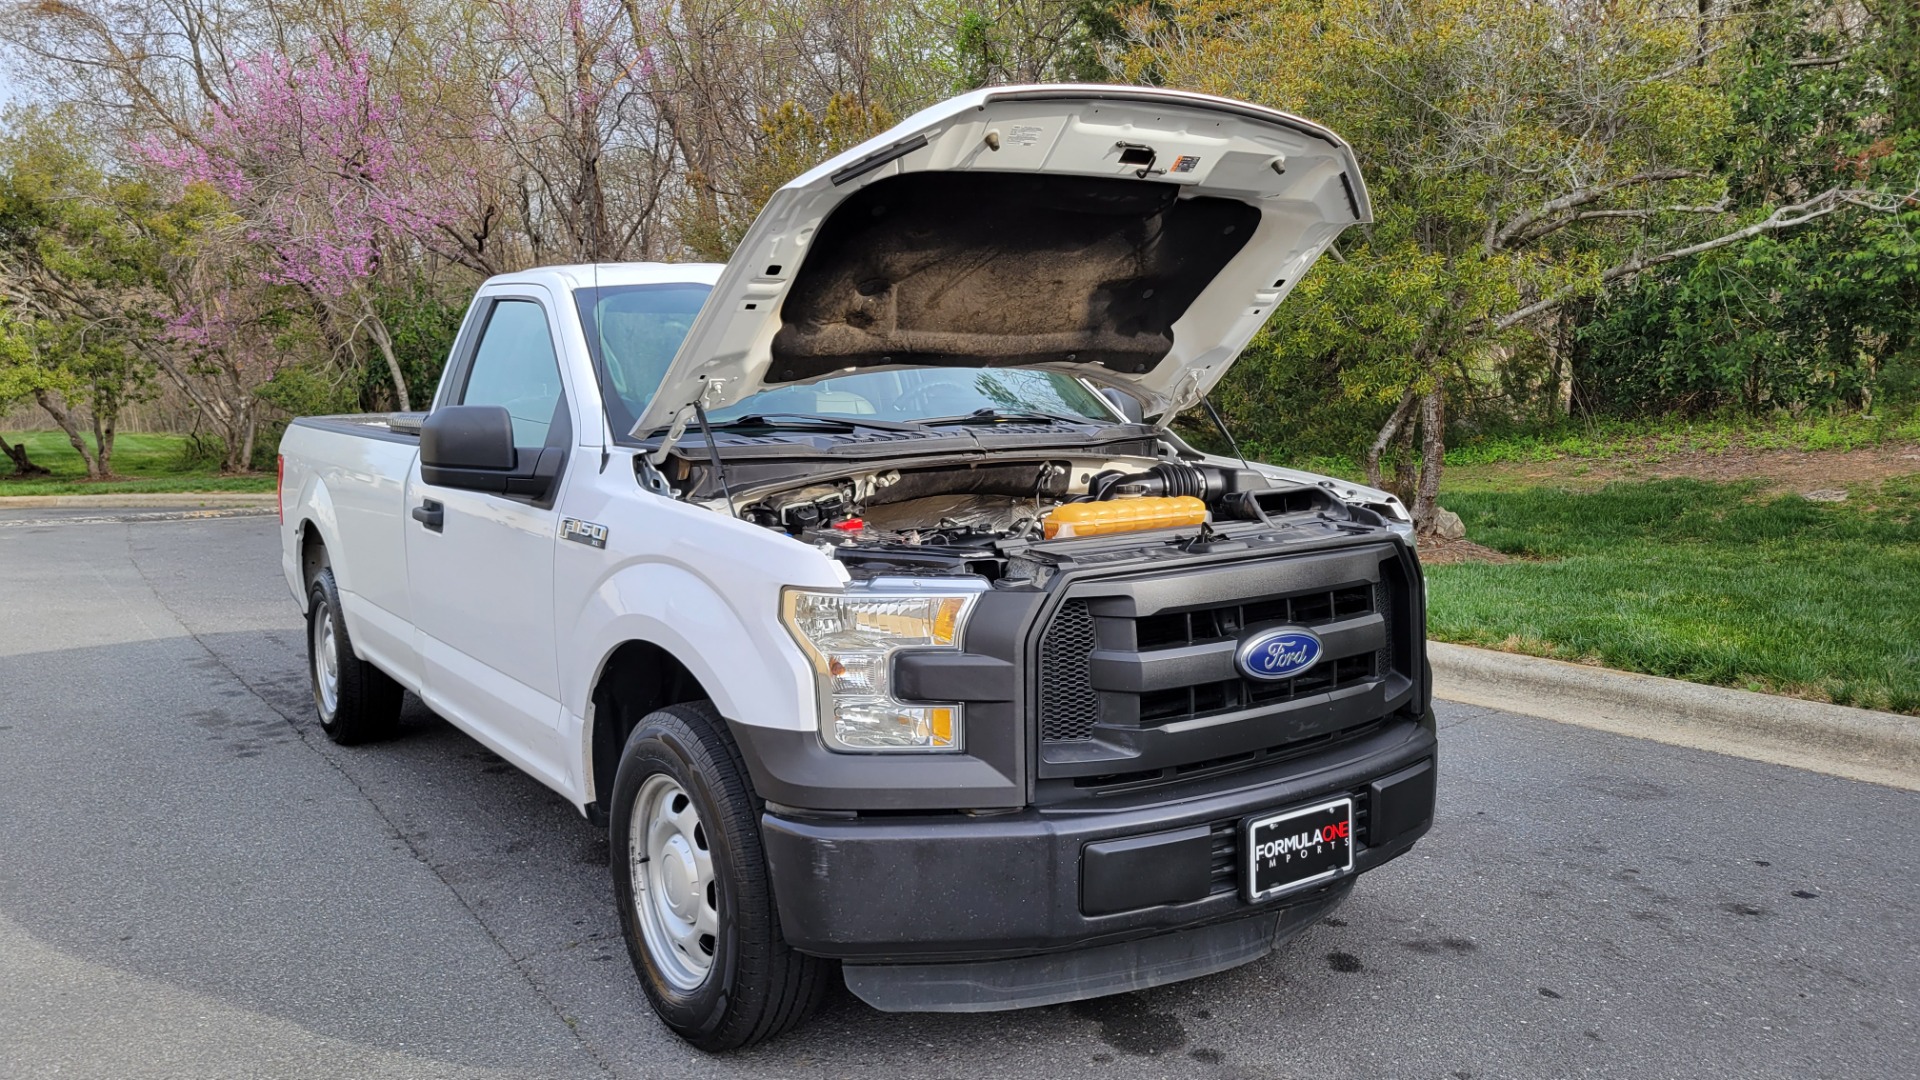 Used 2016 Ford F-150 XL REGULAR CAB 4X2 / 3.5L V6 / 6-SPD AUTO / TOWING / TOOL BOX for sale Sold at Formula Imports in Charlotte NC 28227 12